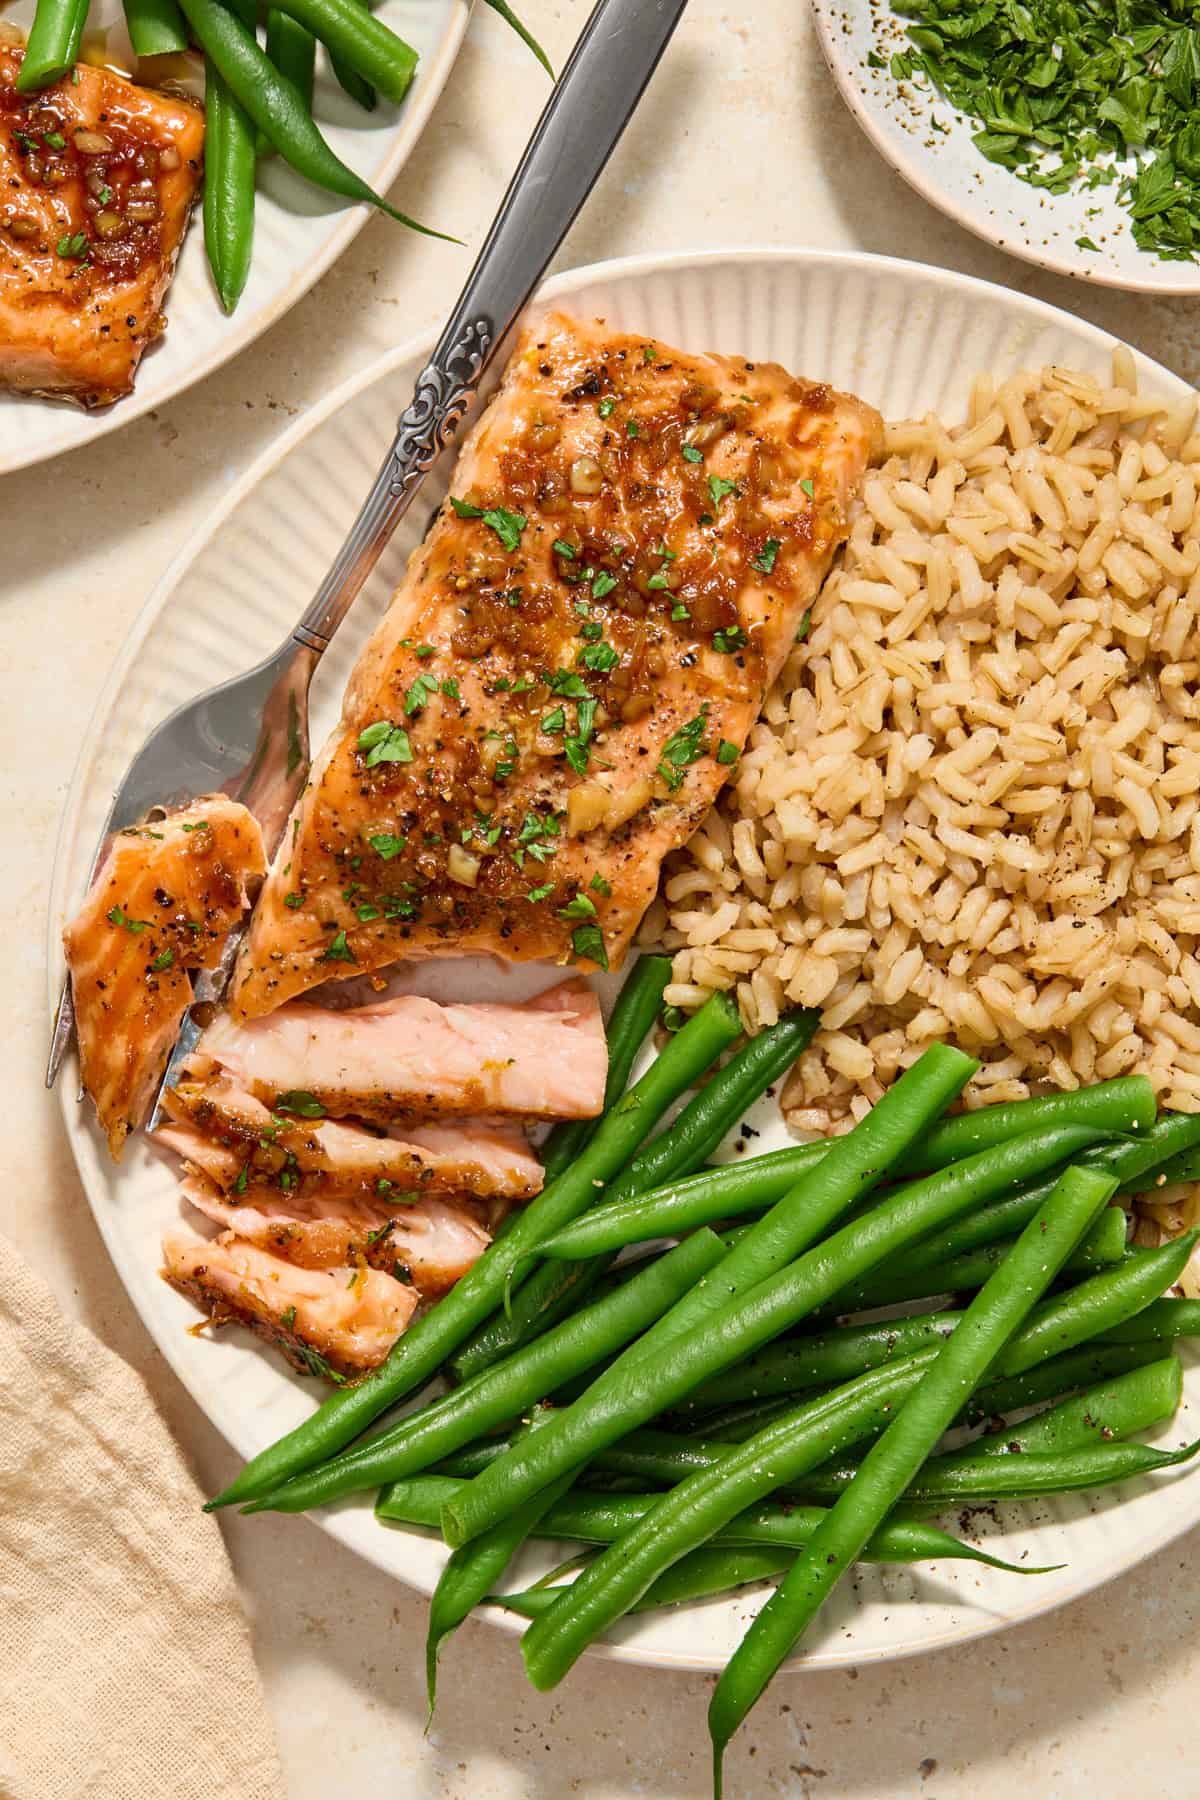 Overhead view of plate with salmon flaked with fork and green beans and rice on plate along with it.